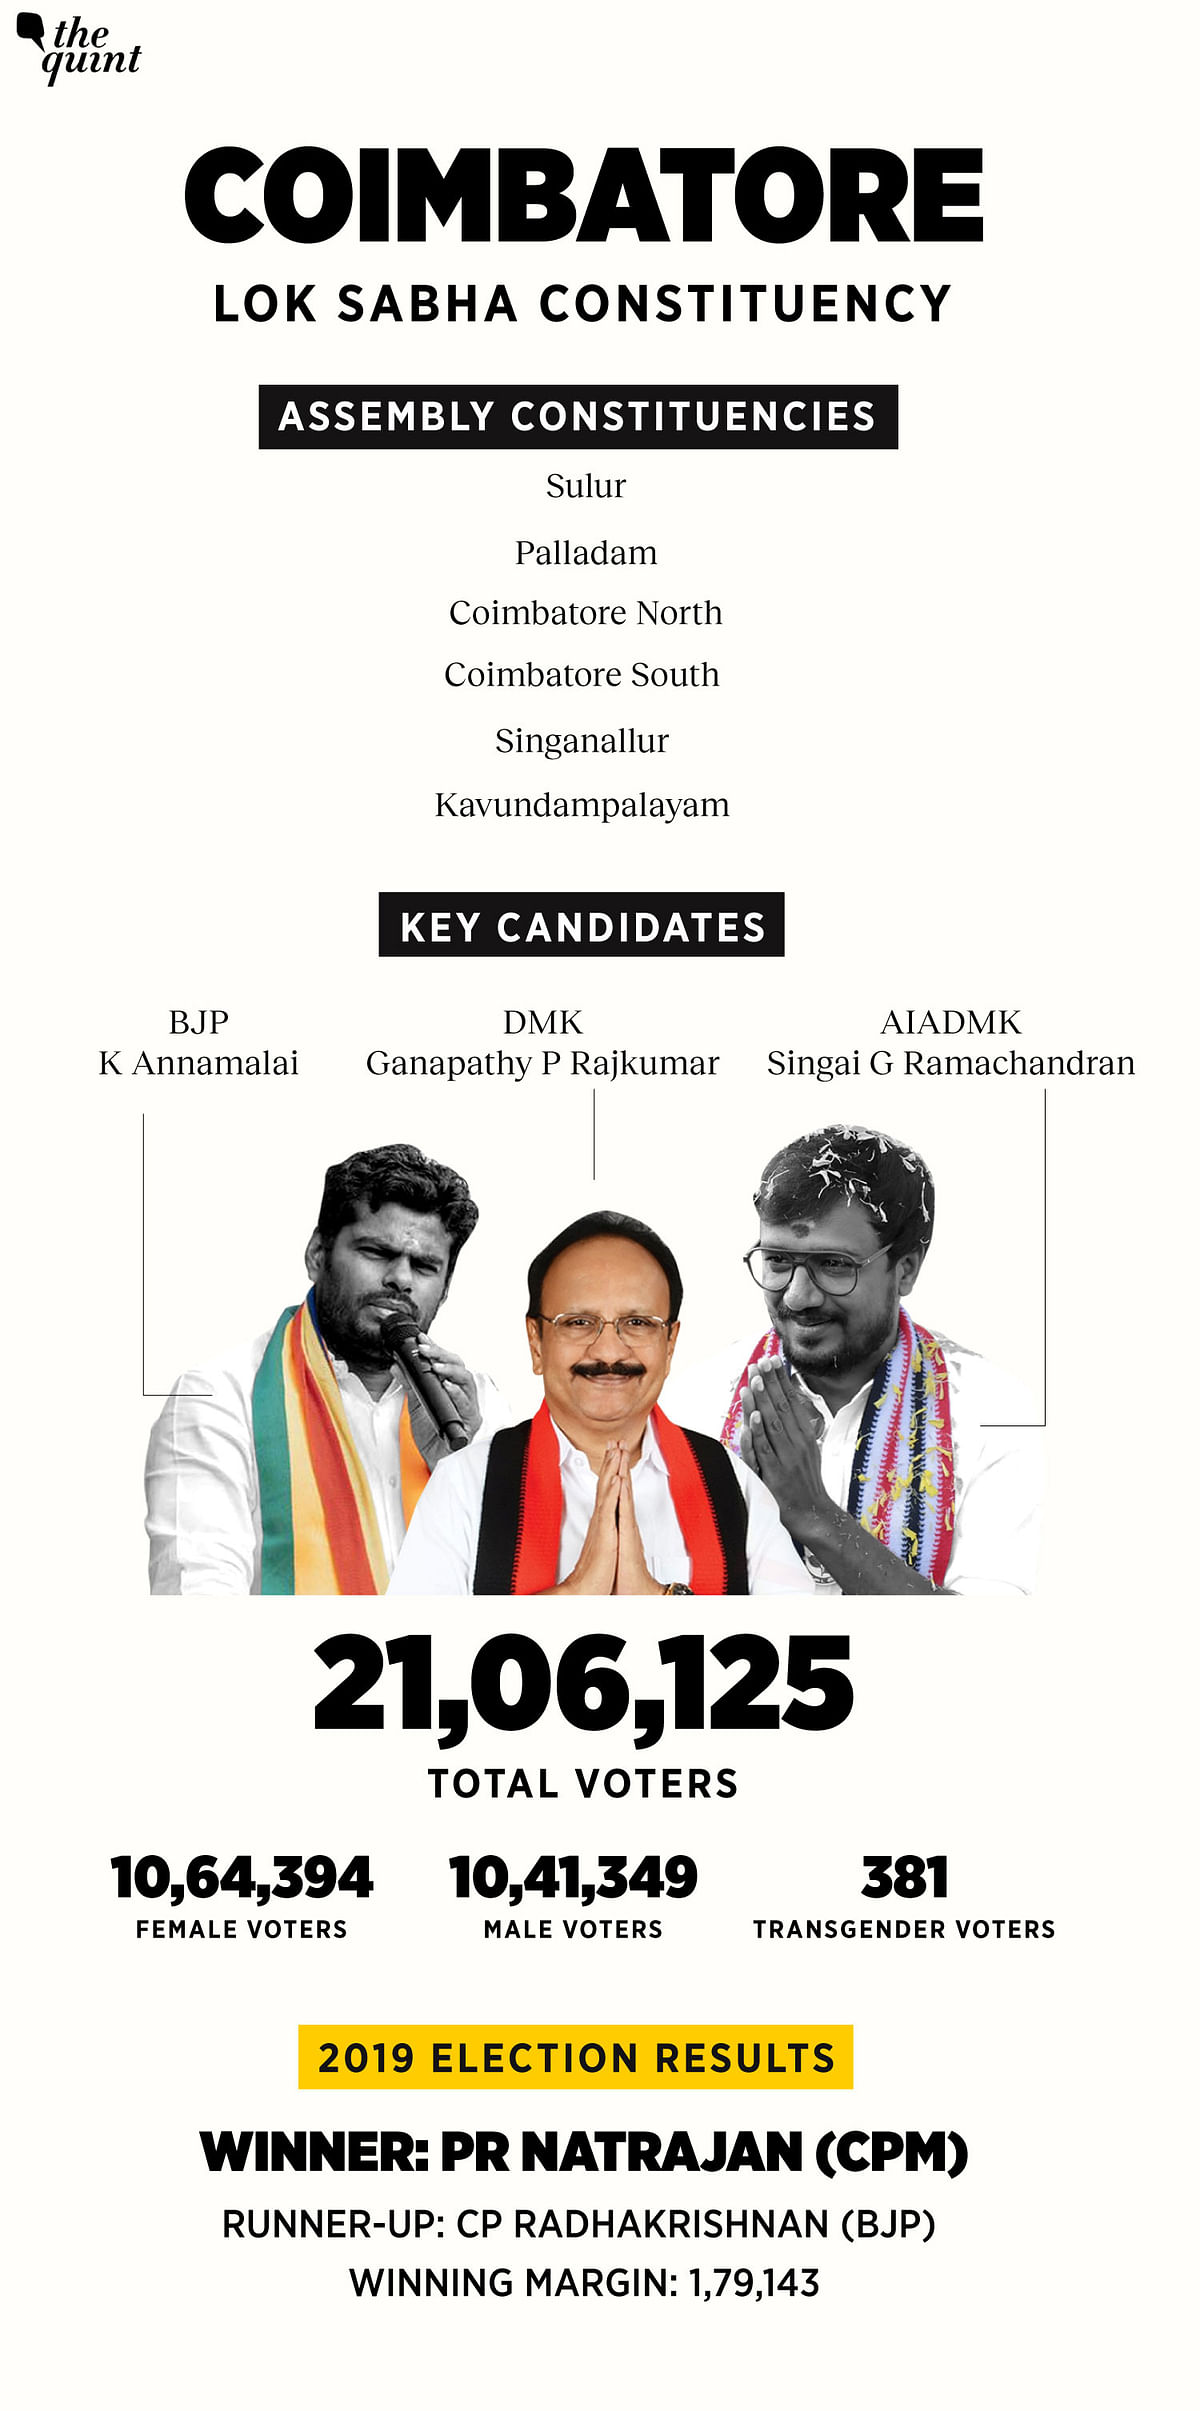 The battle for Coimbatore is one the most watched as the DMK and the AIADMK take on BJP's Annamalai.